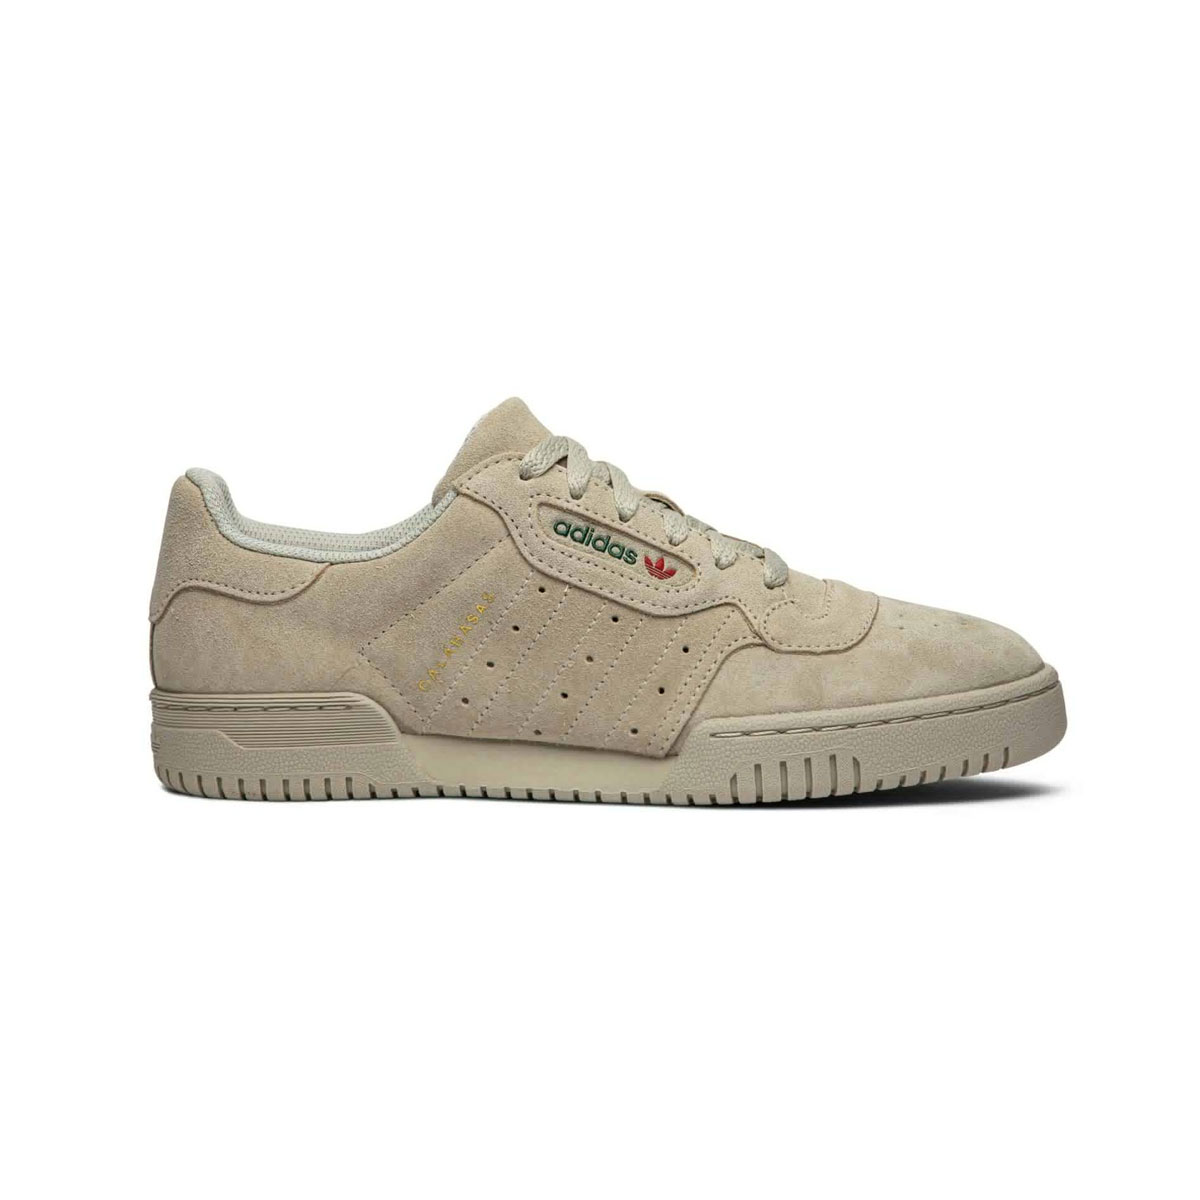 Adidas Yeezy Powerphase Clear Brown 